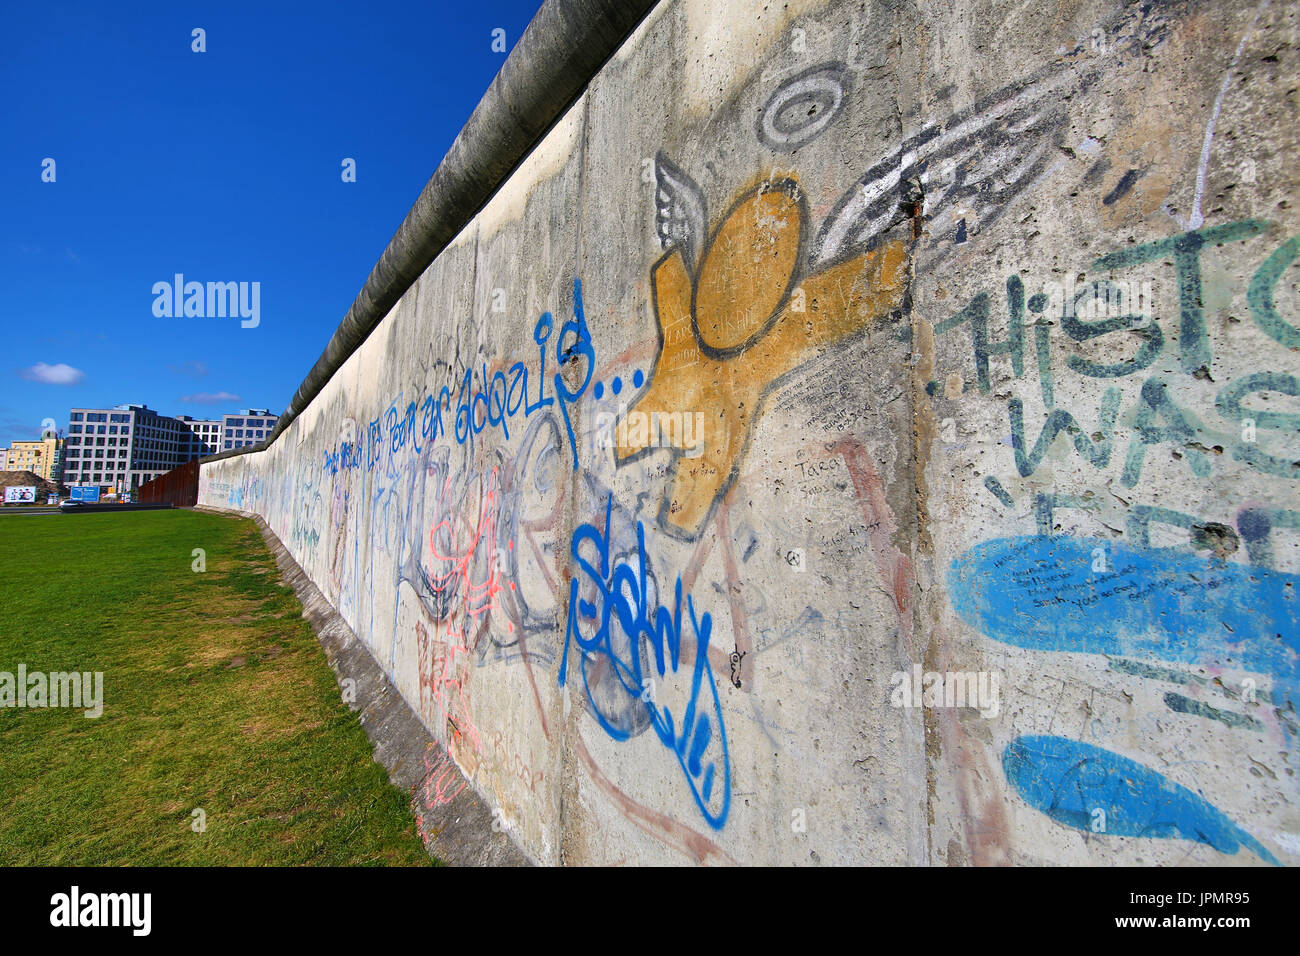 Preserved sections of the Berlin Wall at the Berlin Wall Memorial on Bernauer Strasse, Berlin, Germany Stock Photo